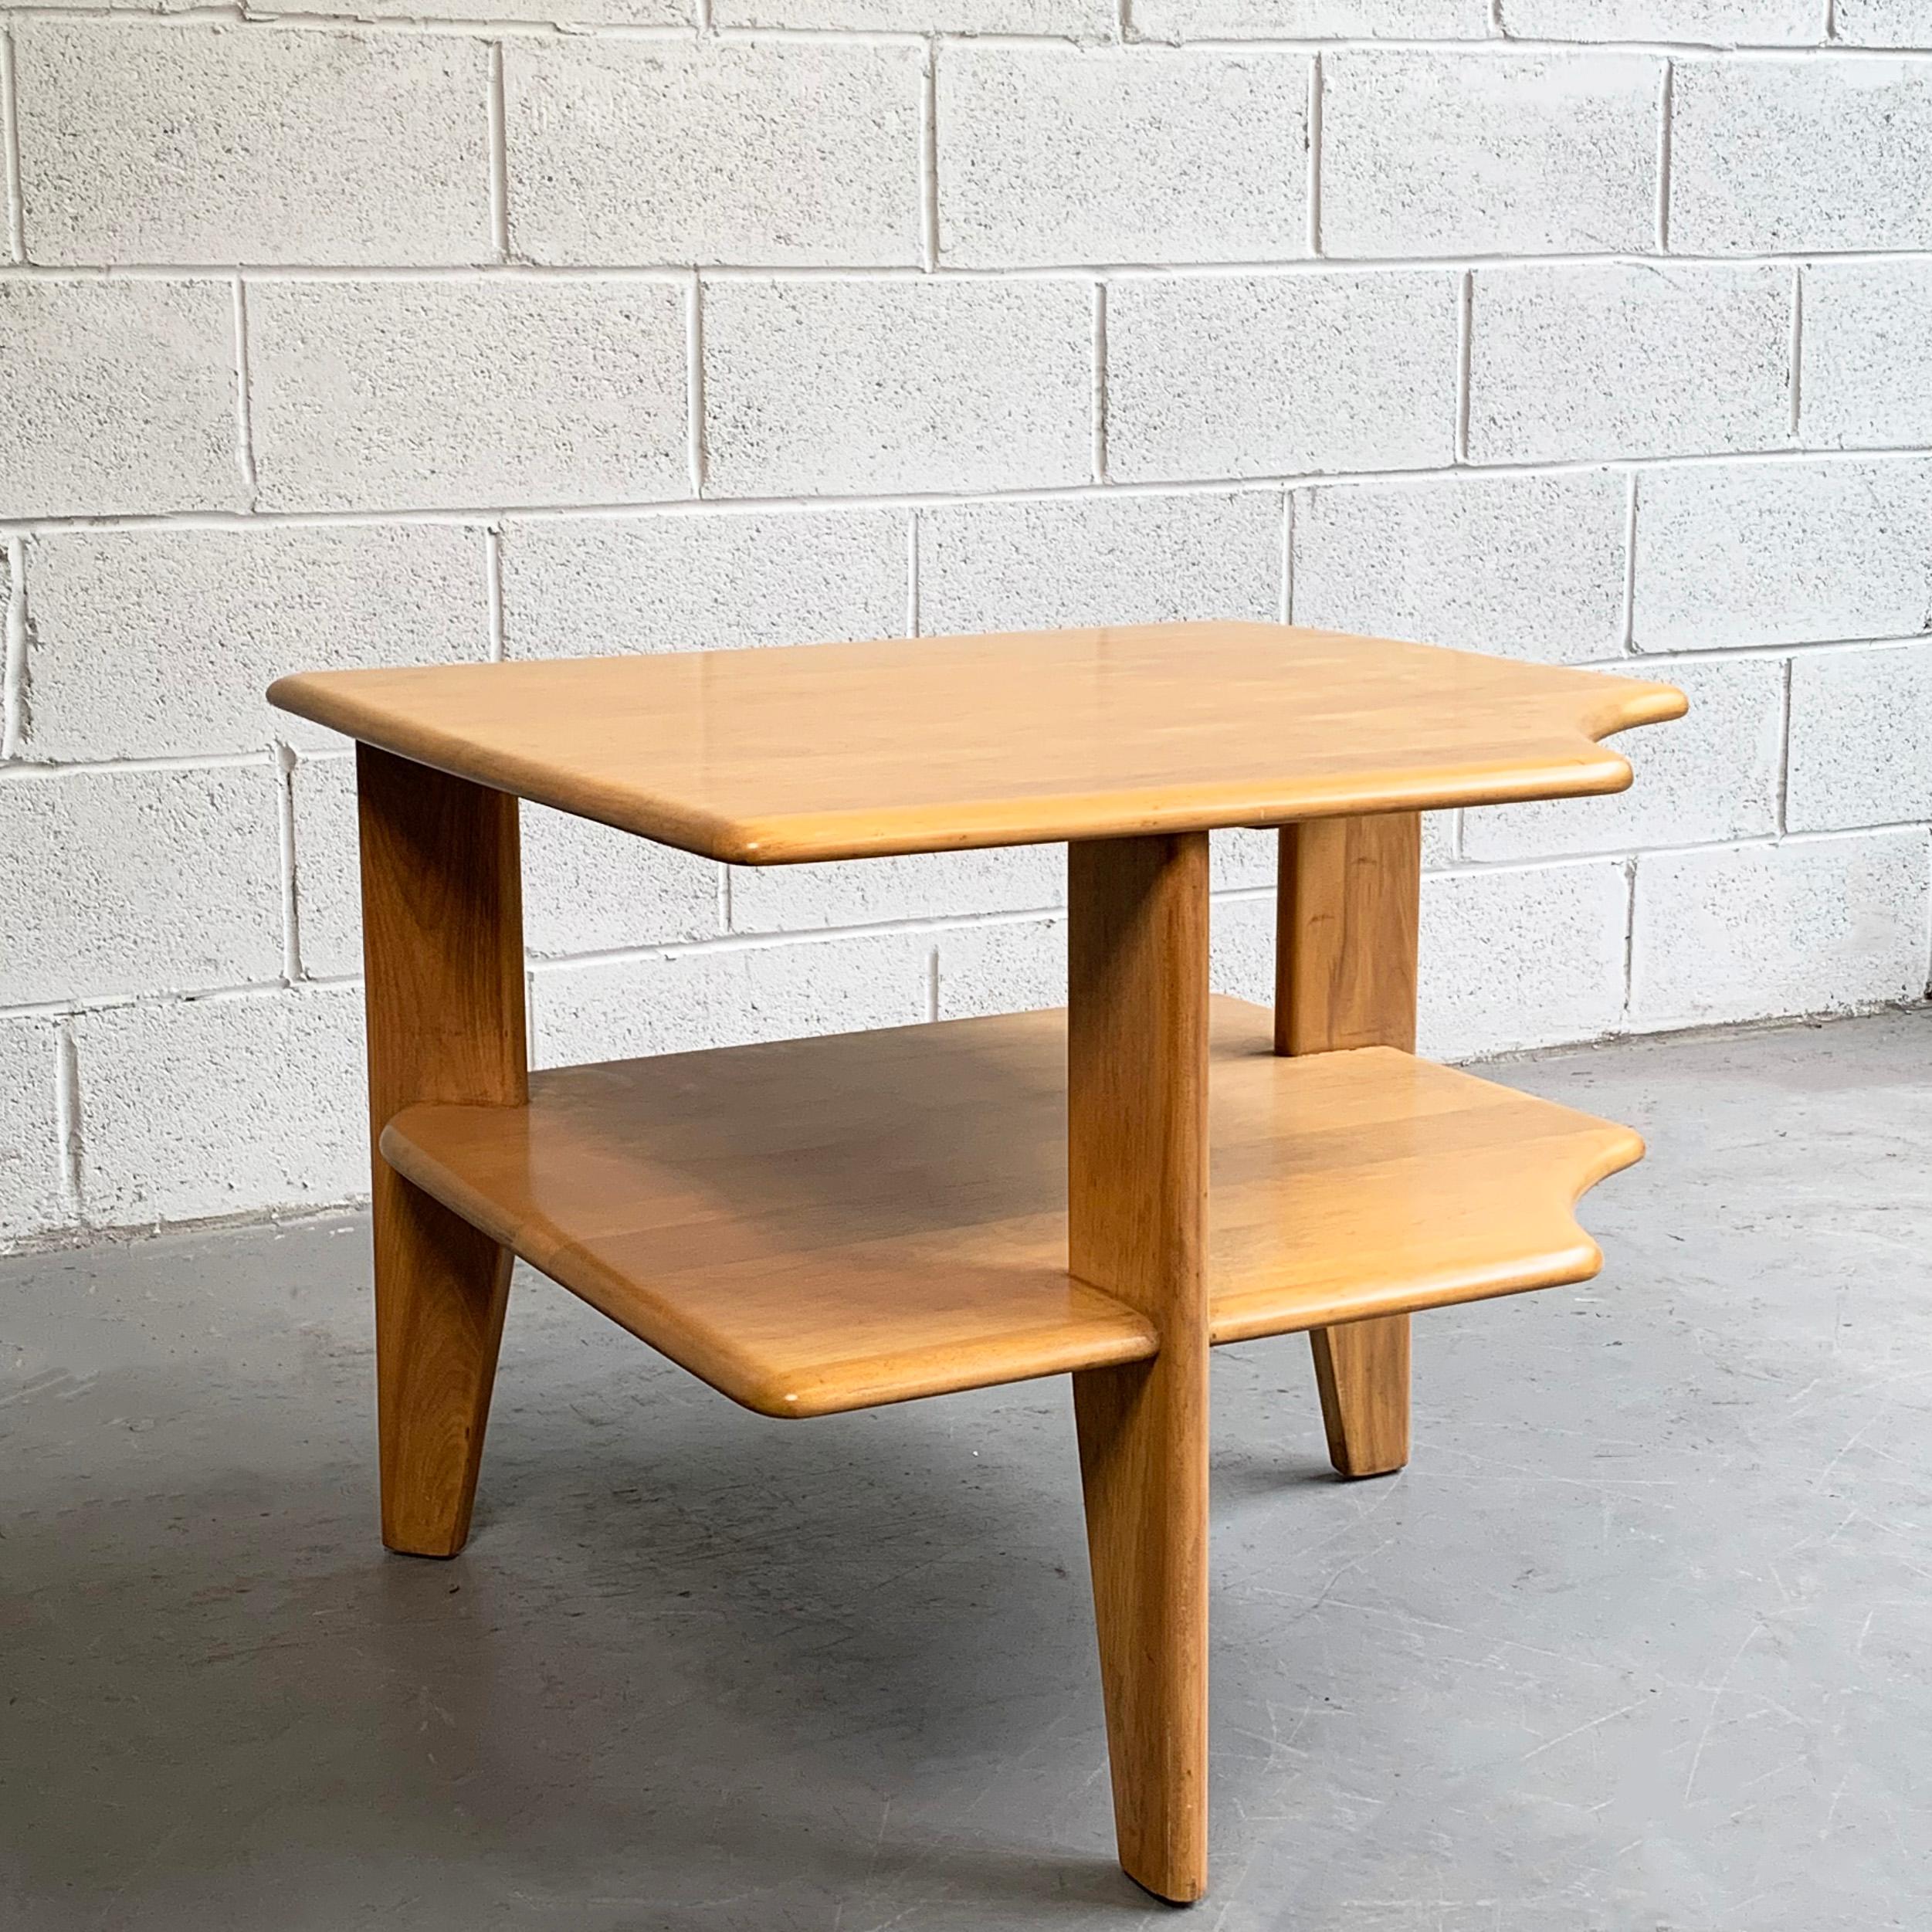 Russel Wright Tiered Maple Corner Table 1